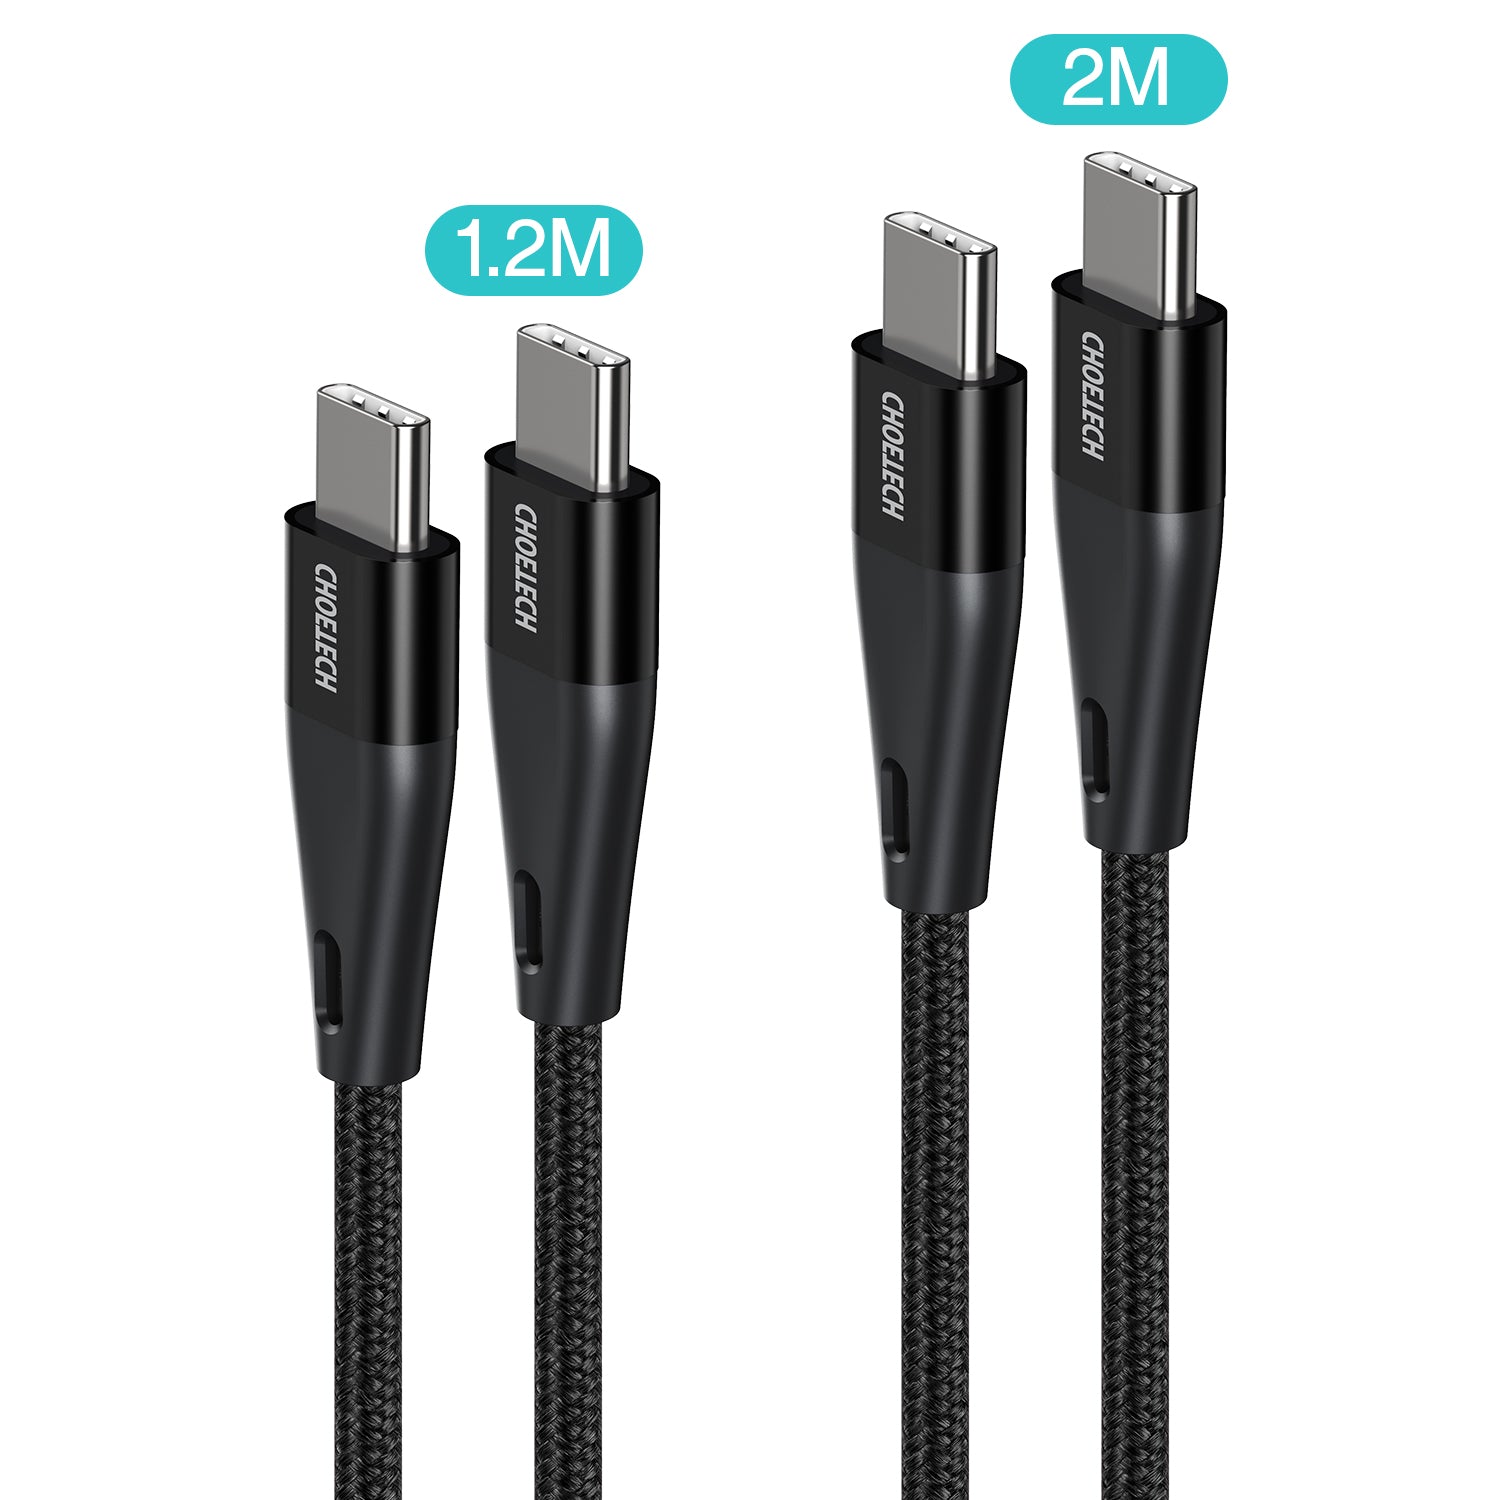 XCC-1003/1004 USB-C to USB-C Cable, CHOETECH 60W USB Type C Braided Fast Charging Cable (20V 3A 4ft/6.6ft)